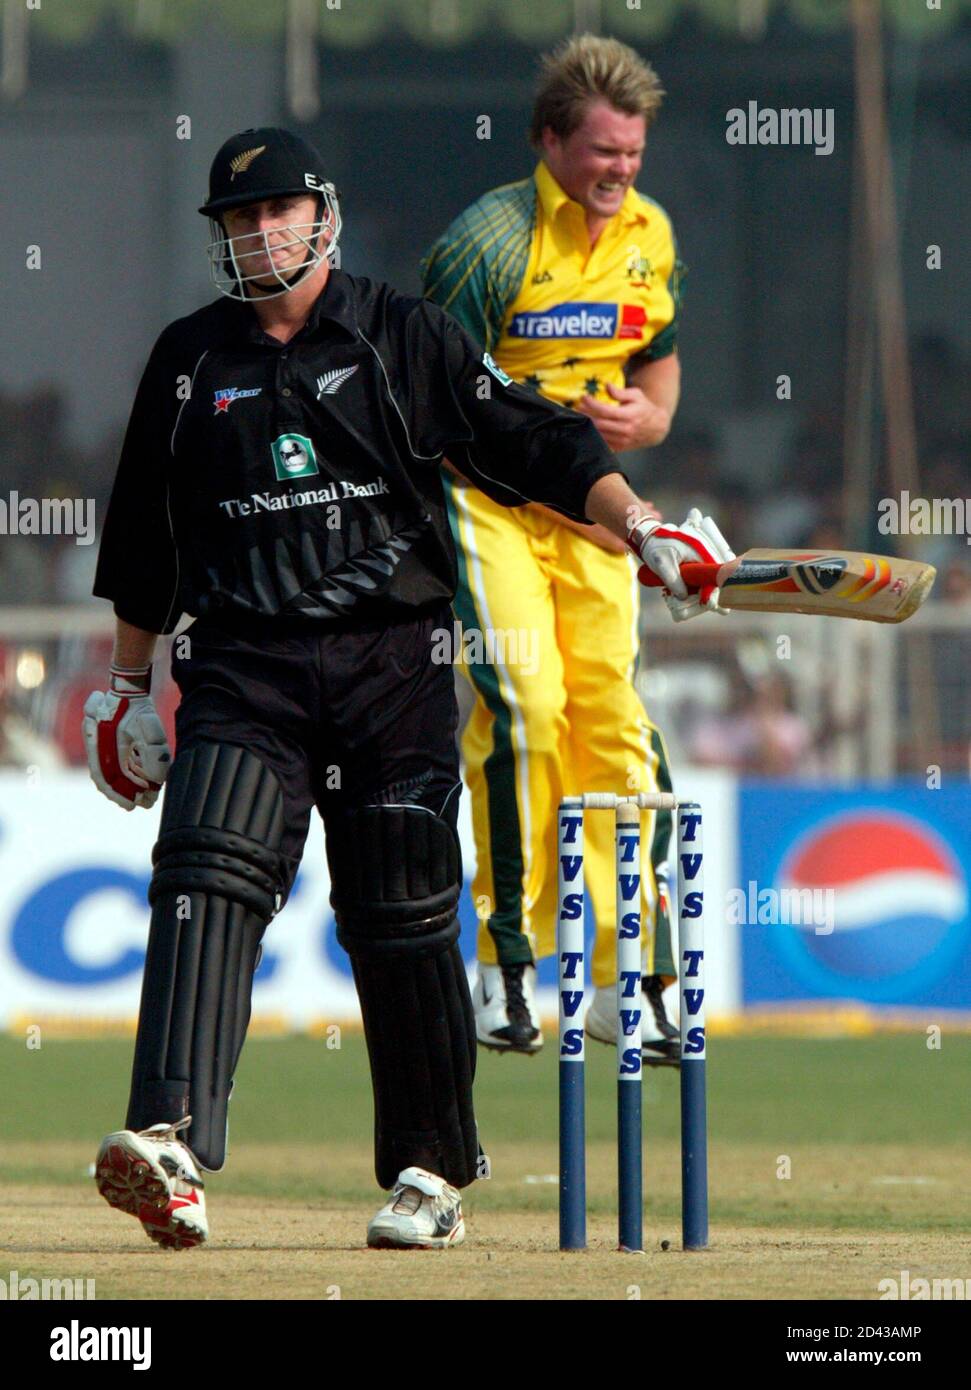 Australian bowler Brad Williams (R) jumps in jubliation after taking the wicket of New Zealand batsman Scott Styris in the third one-dayer of the triangular series in Faridabad, October 29, 2003. REUTERS/Kamal Kishore  KK/RCS Stock Photo